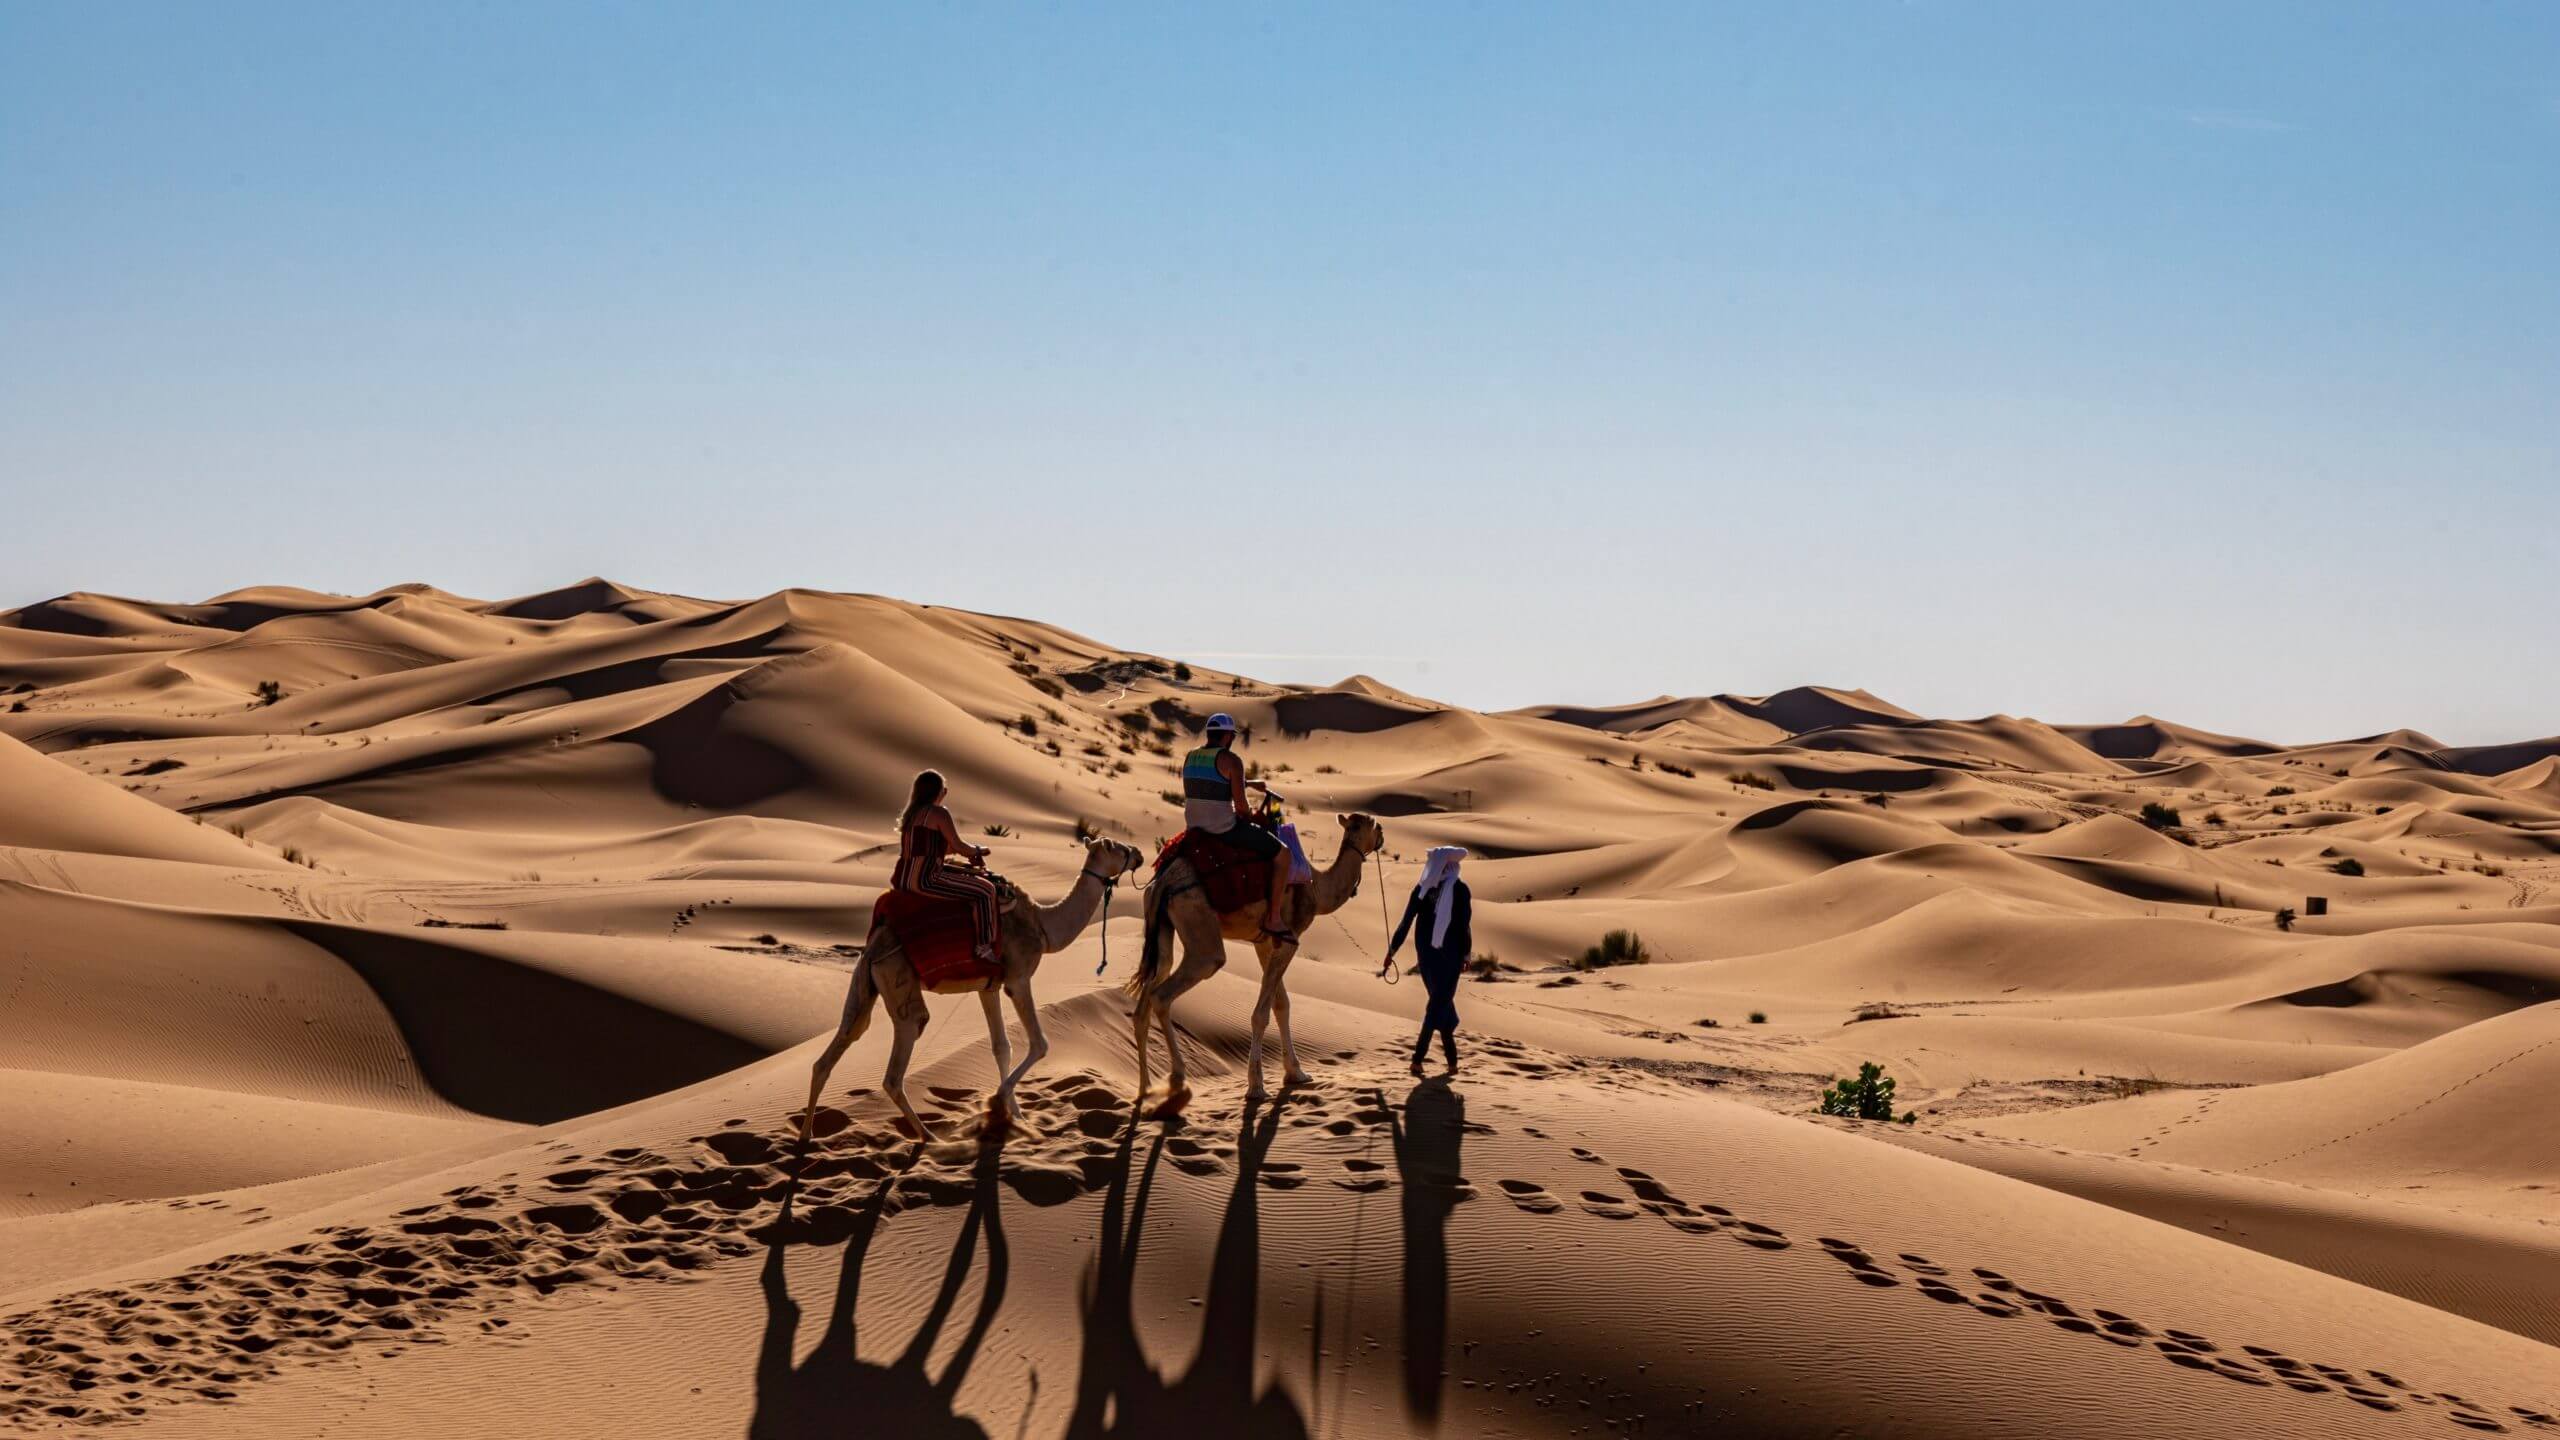 Discover Morocco's Great South: Authentic Moroccan Experience: A group of our clients are riding camels in the desert, surrounded by a vast expanse of sand and rock.